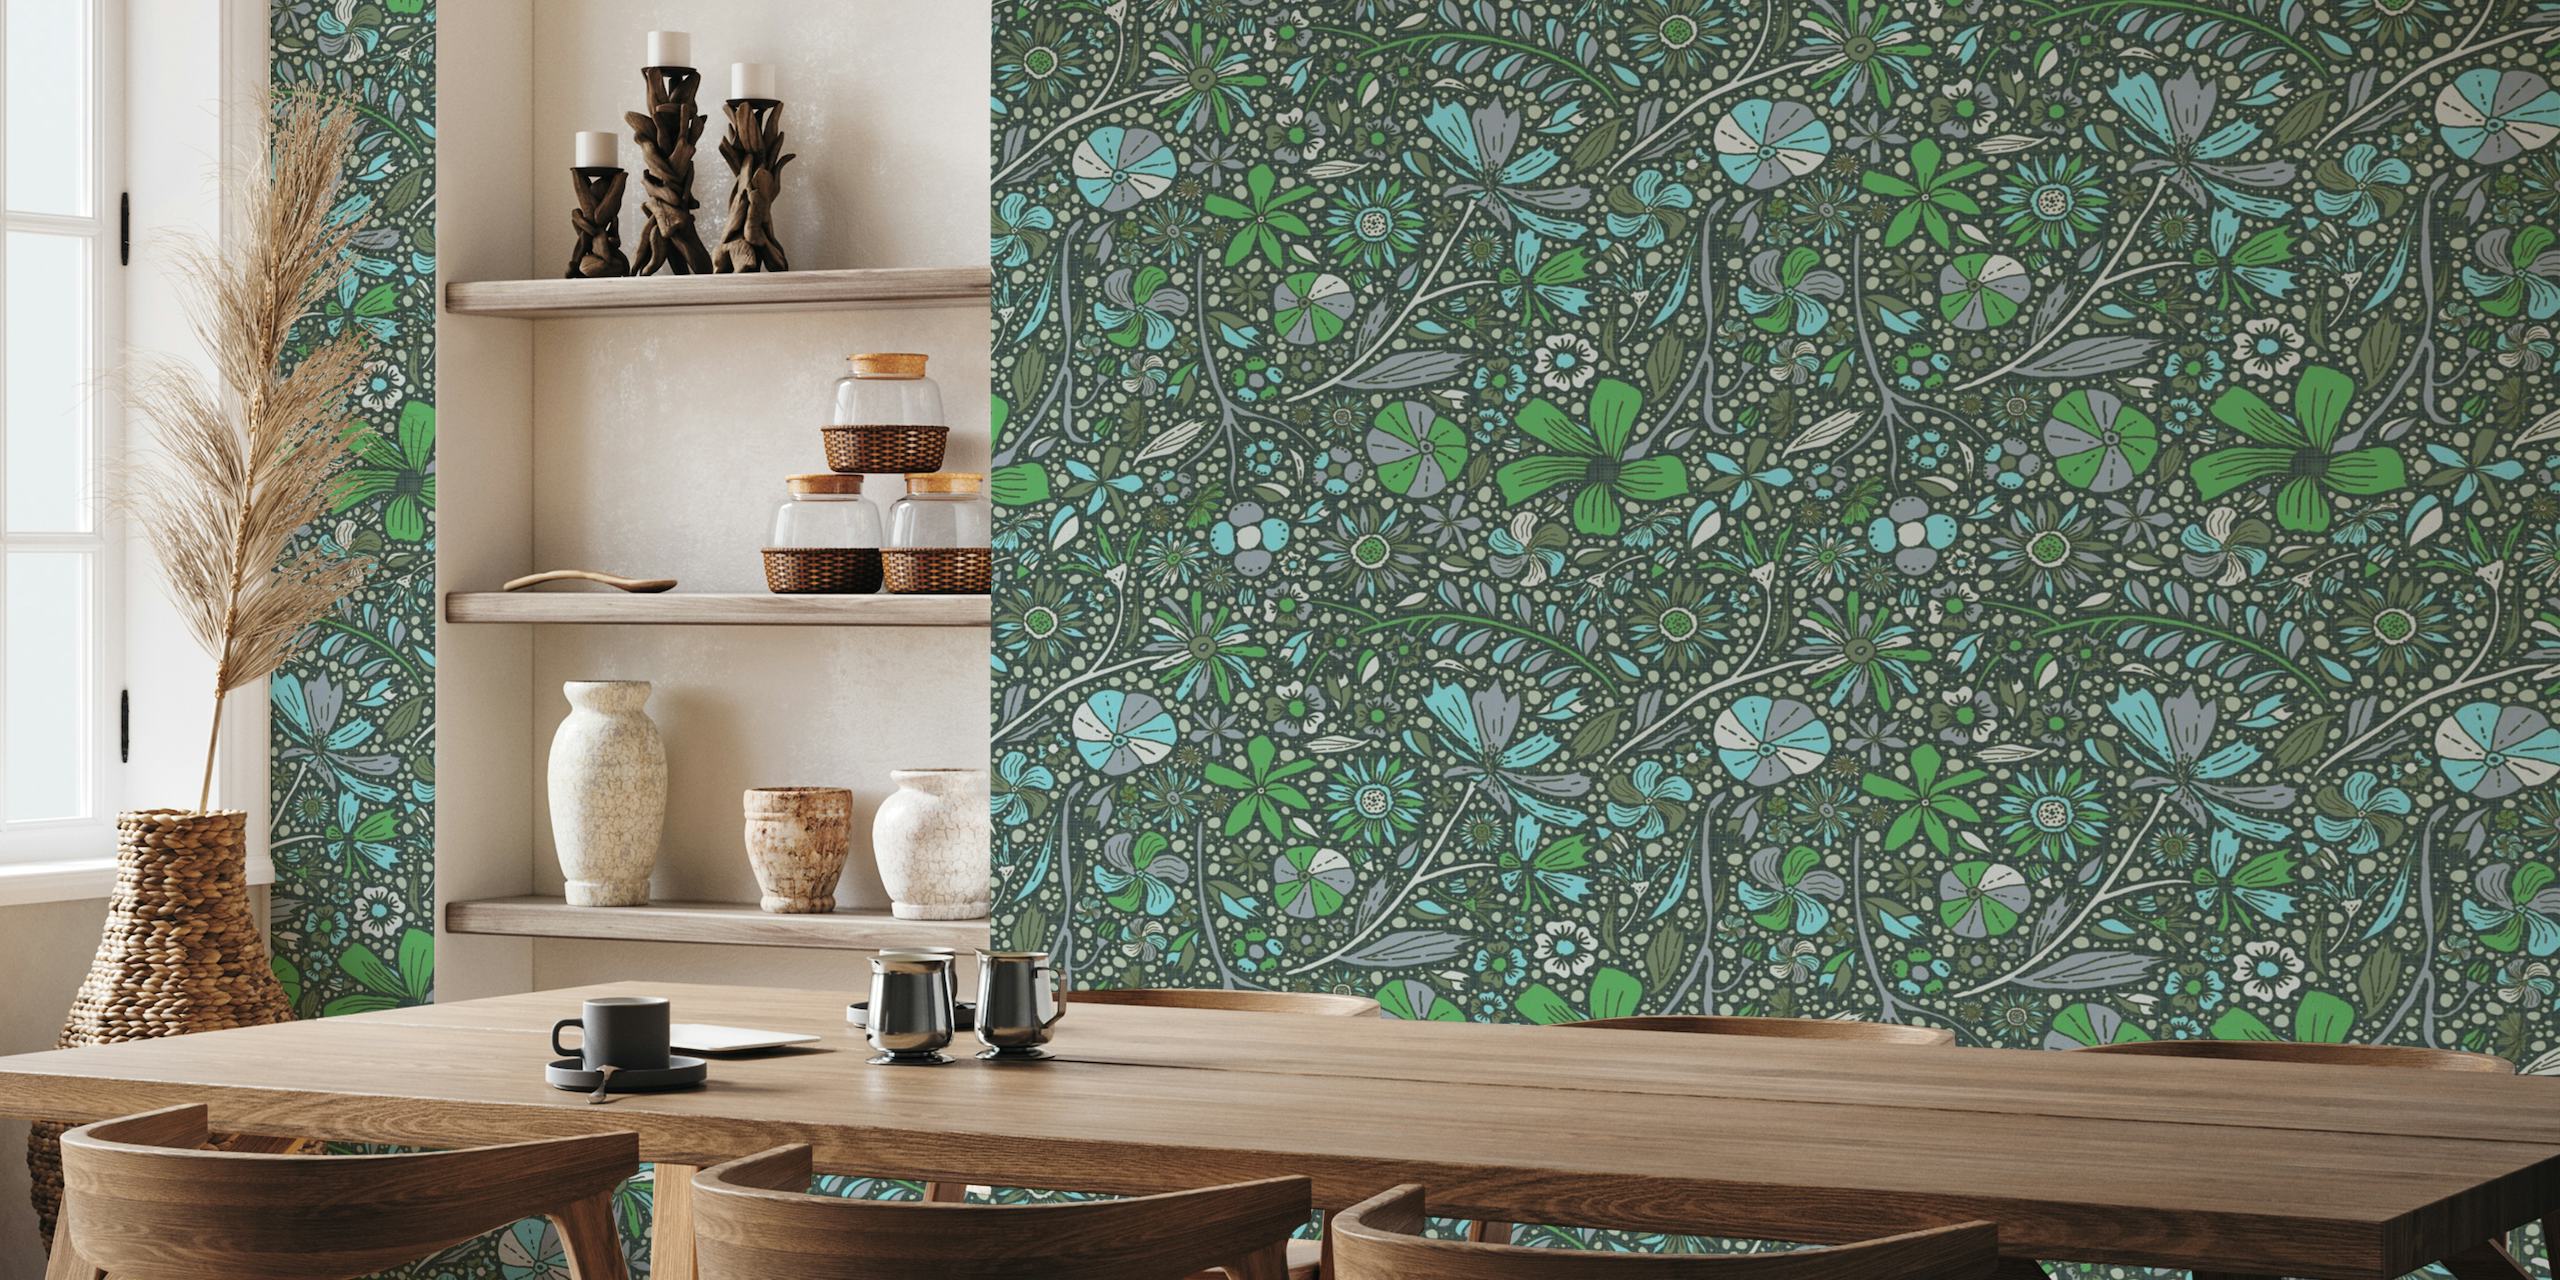 Maximalist bohemian floral pattern blue and teal papel pintado